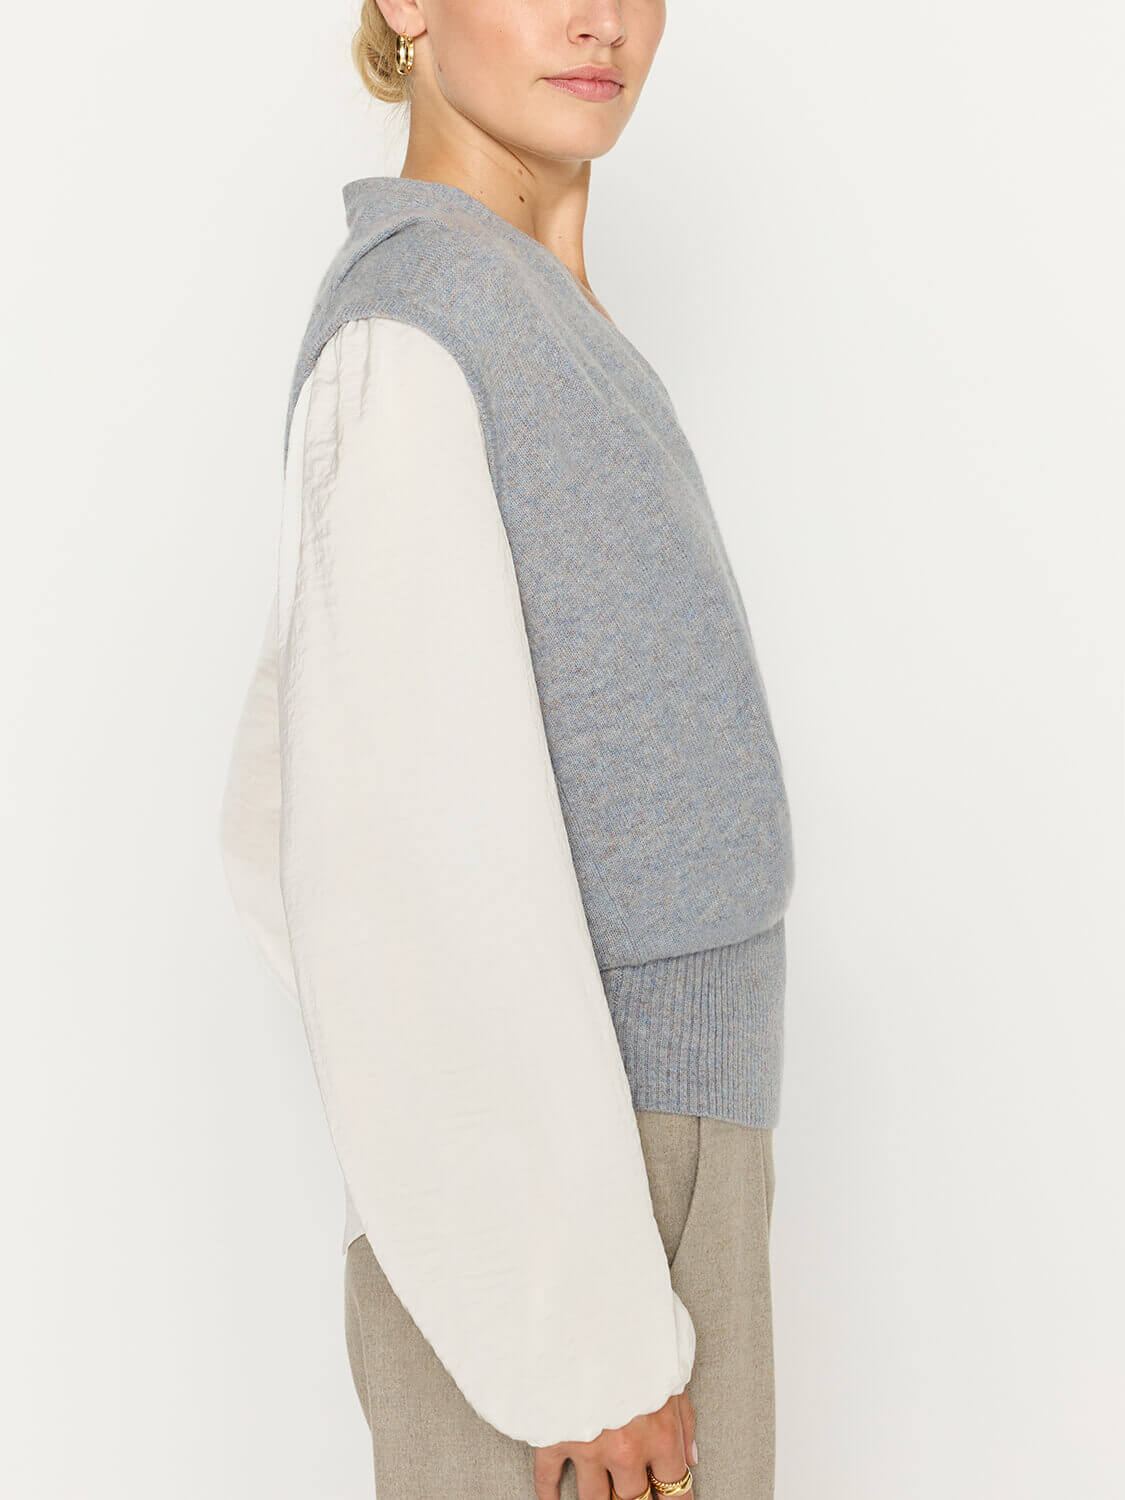 Phinneas blue white layered woven and knit sweater side view